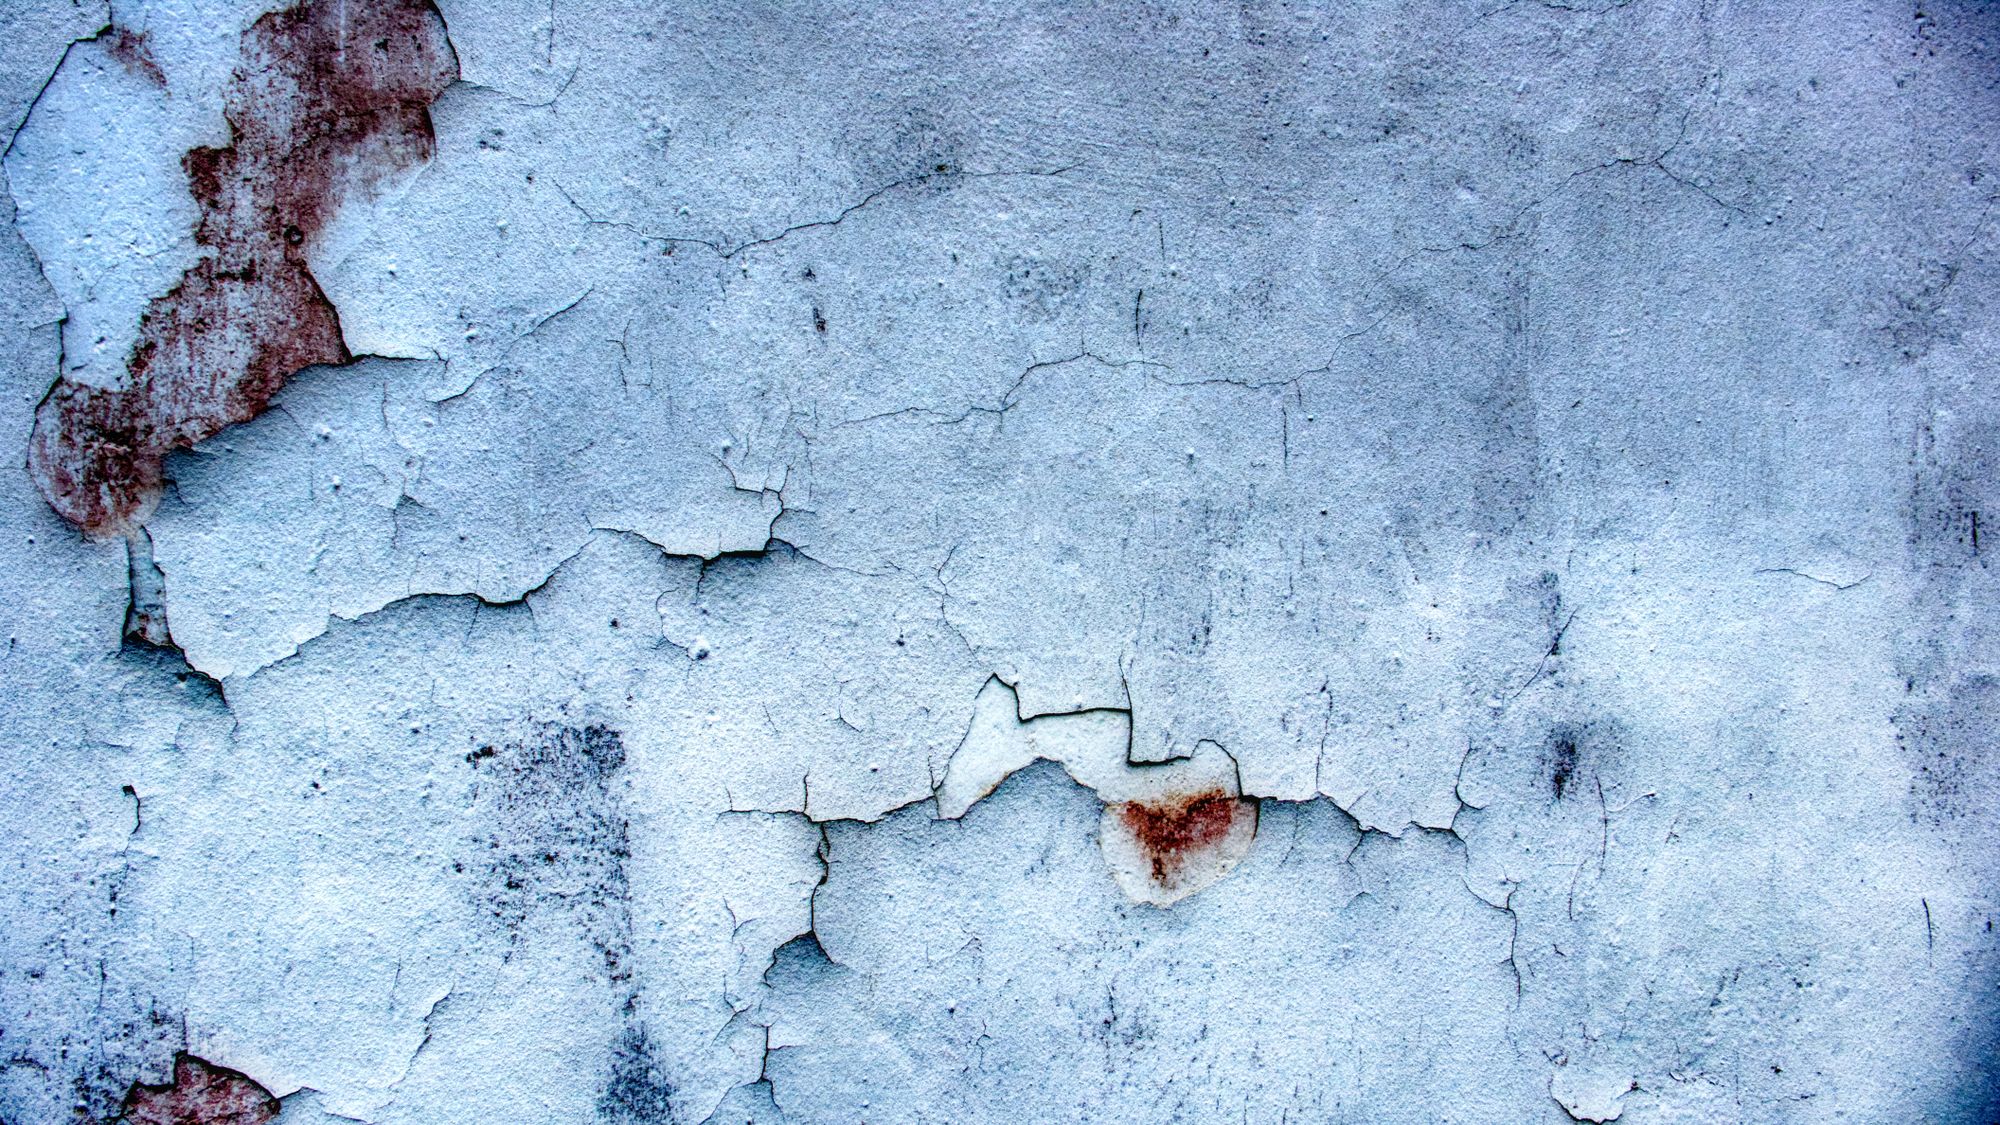 Image Description: A clearly aged wall with peeling paint and spots of rust